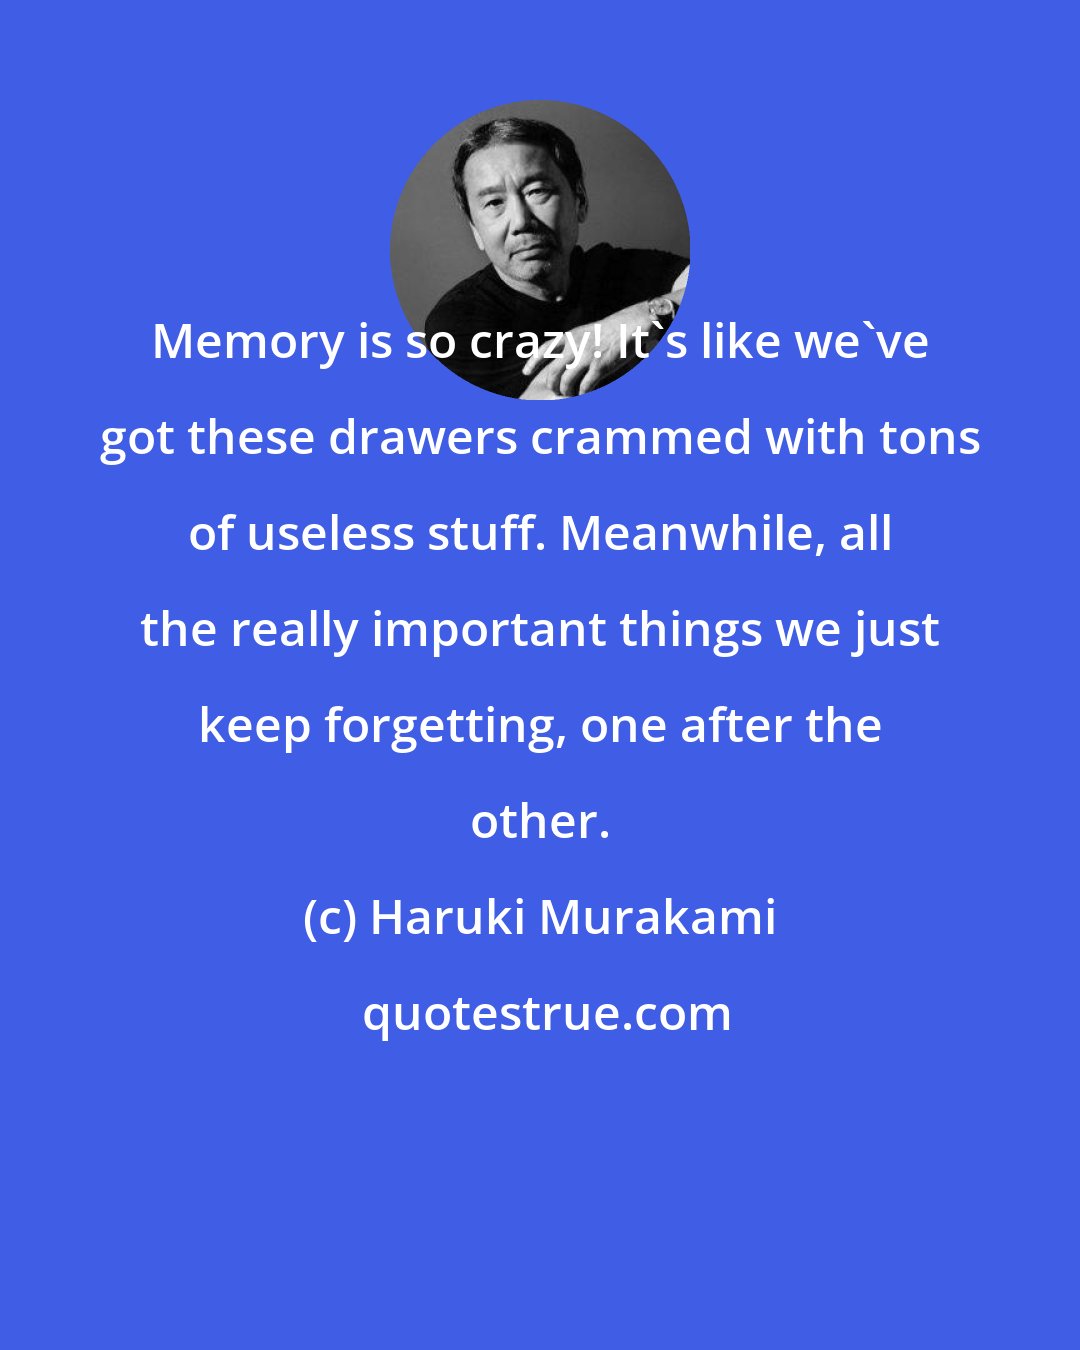 Haruki Murakami: Memory is so crazy! It's like we've got these drawers crammed with tons of useless stuff. Meanwhile, all the really important things we just keep forgetting, one after the other.